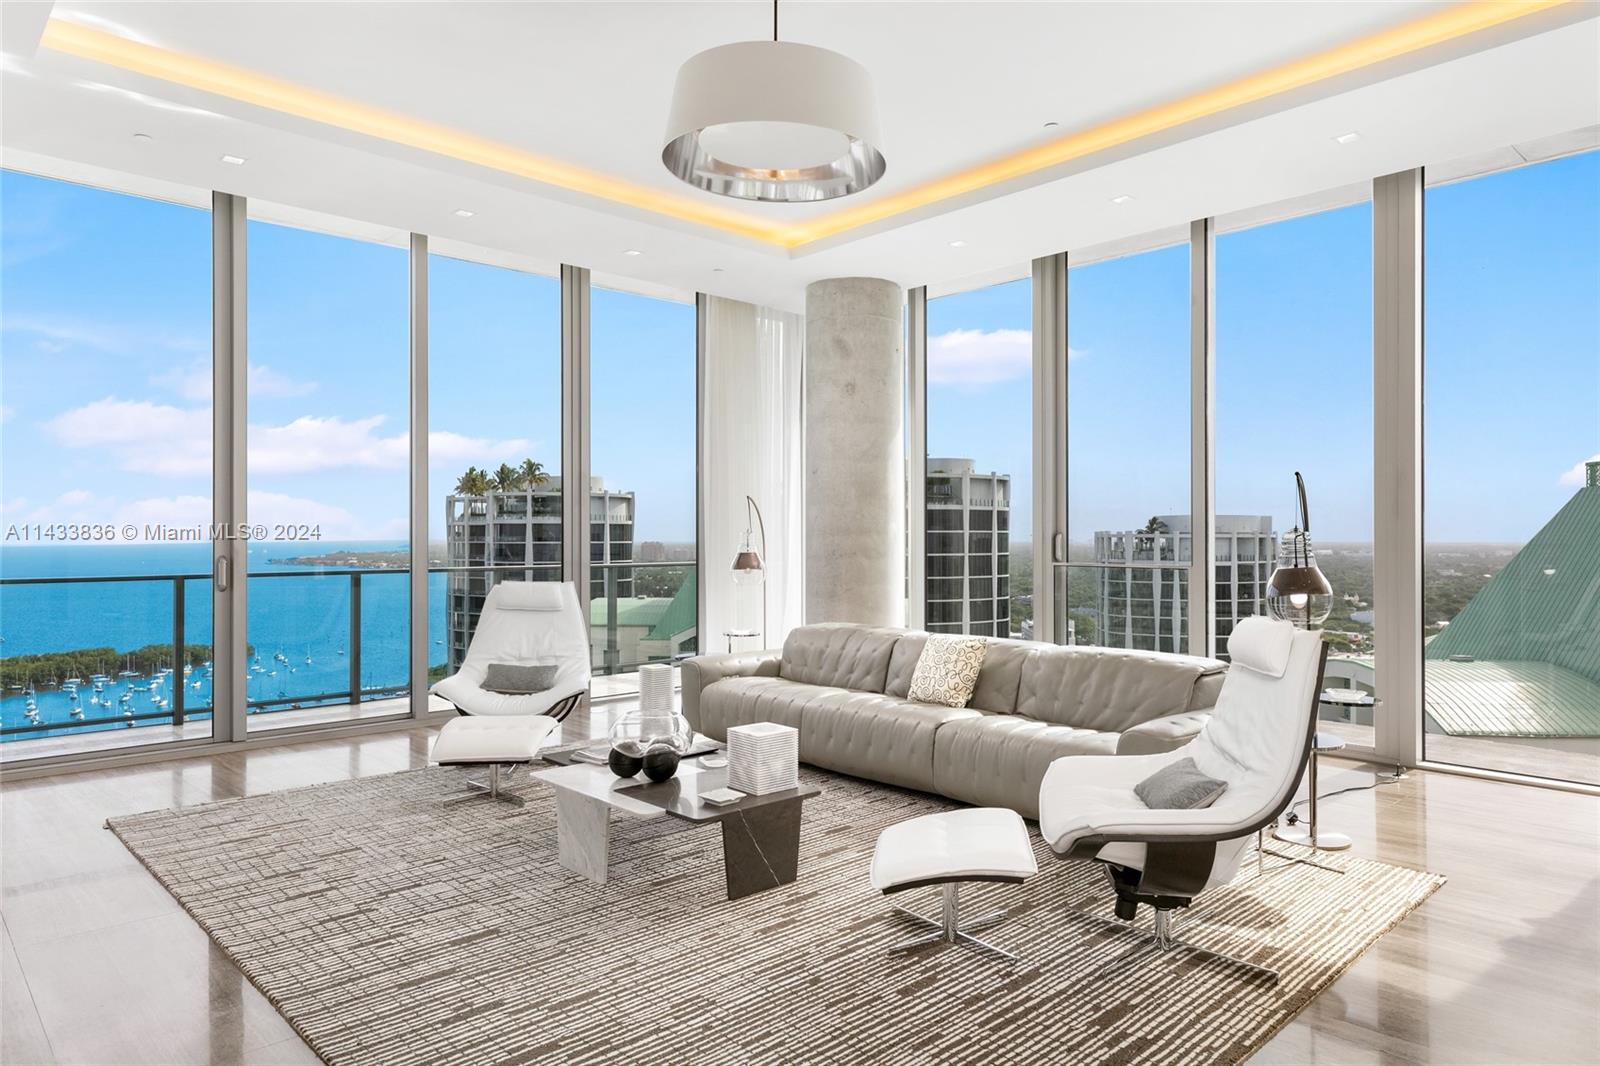 Discover Miami's grandest single-floor condo in Miami, spanning 11,000 sq. ft with 12' ceilings. This penthouse, designed by Nick Luaces, showcases 6 beds, 6 baths, 2 powder rooms, a theater, library, office, and distinct seating zones. Boasting Bang & Olufsen home automation, the 3,000 sq. ft master suite stuns with a chic dressing area, midnight kitchen, gym, sauna, and terraces accessible from public spaces. This home includes access to a 4-car private garage with storage. Enjoy bay views from the unique wrap-around terrace, private elevator foyer, and deluxe kitchen.  This masterpiece resides in Grove at Grand Bay by architect Bjarke Engels. Experience an unparalleled lifestyle living in the heart of the Grove!